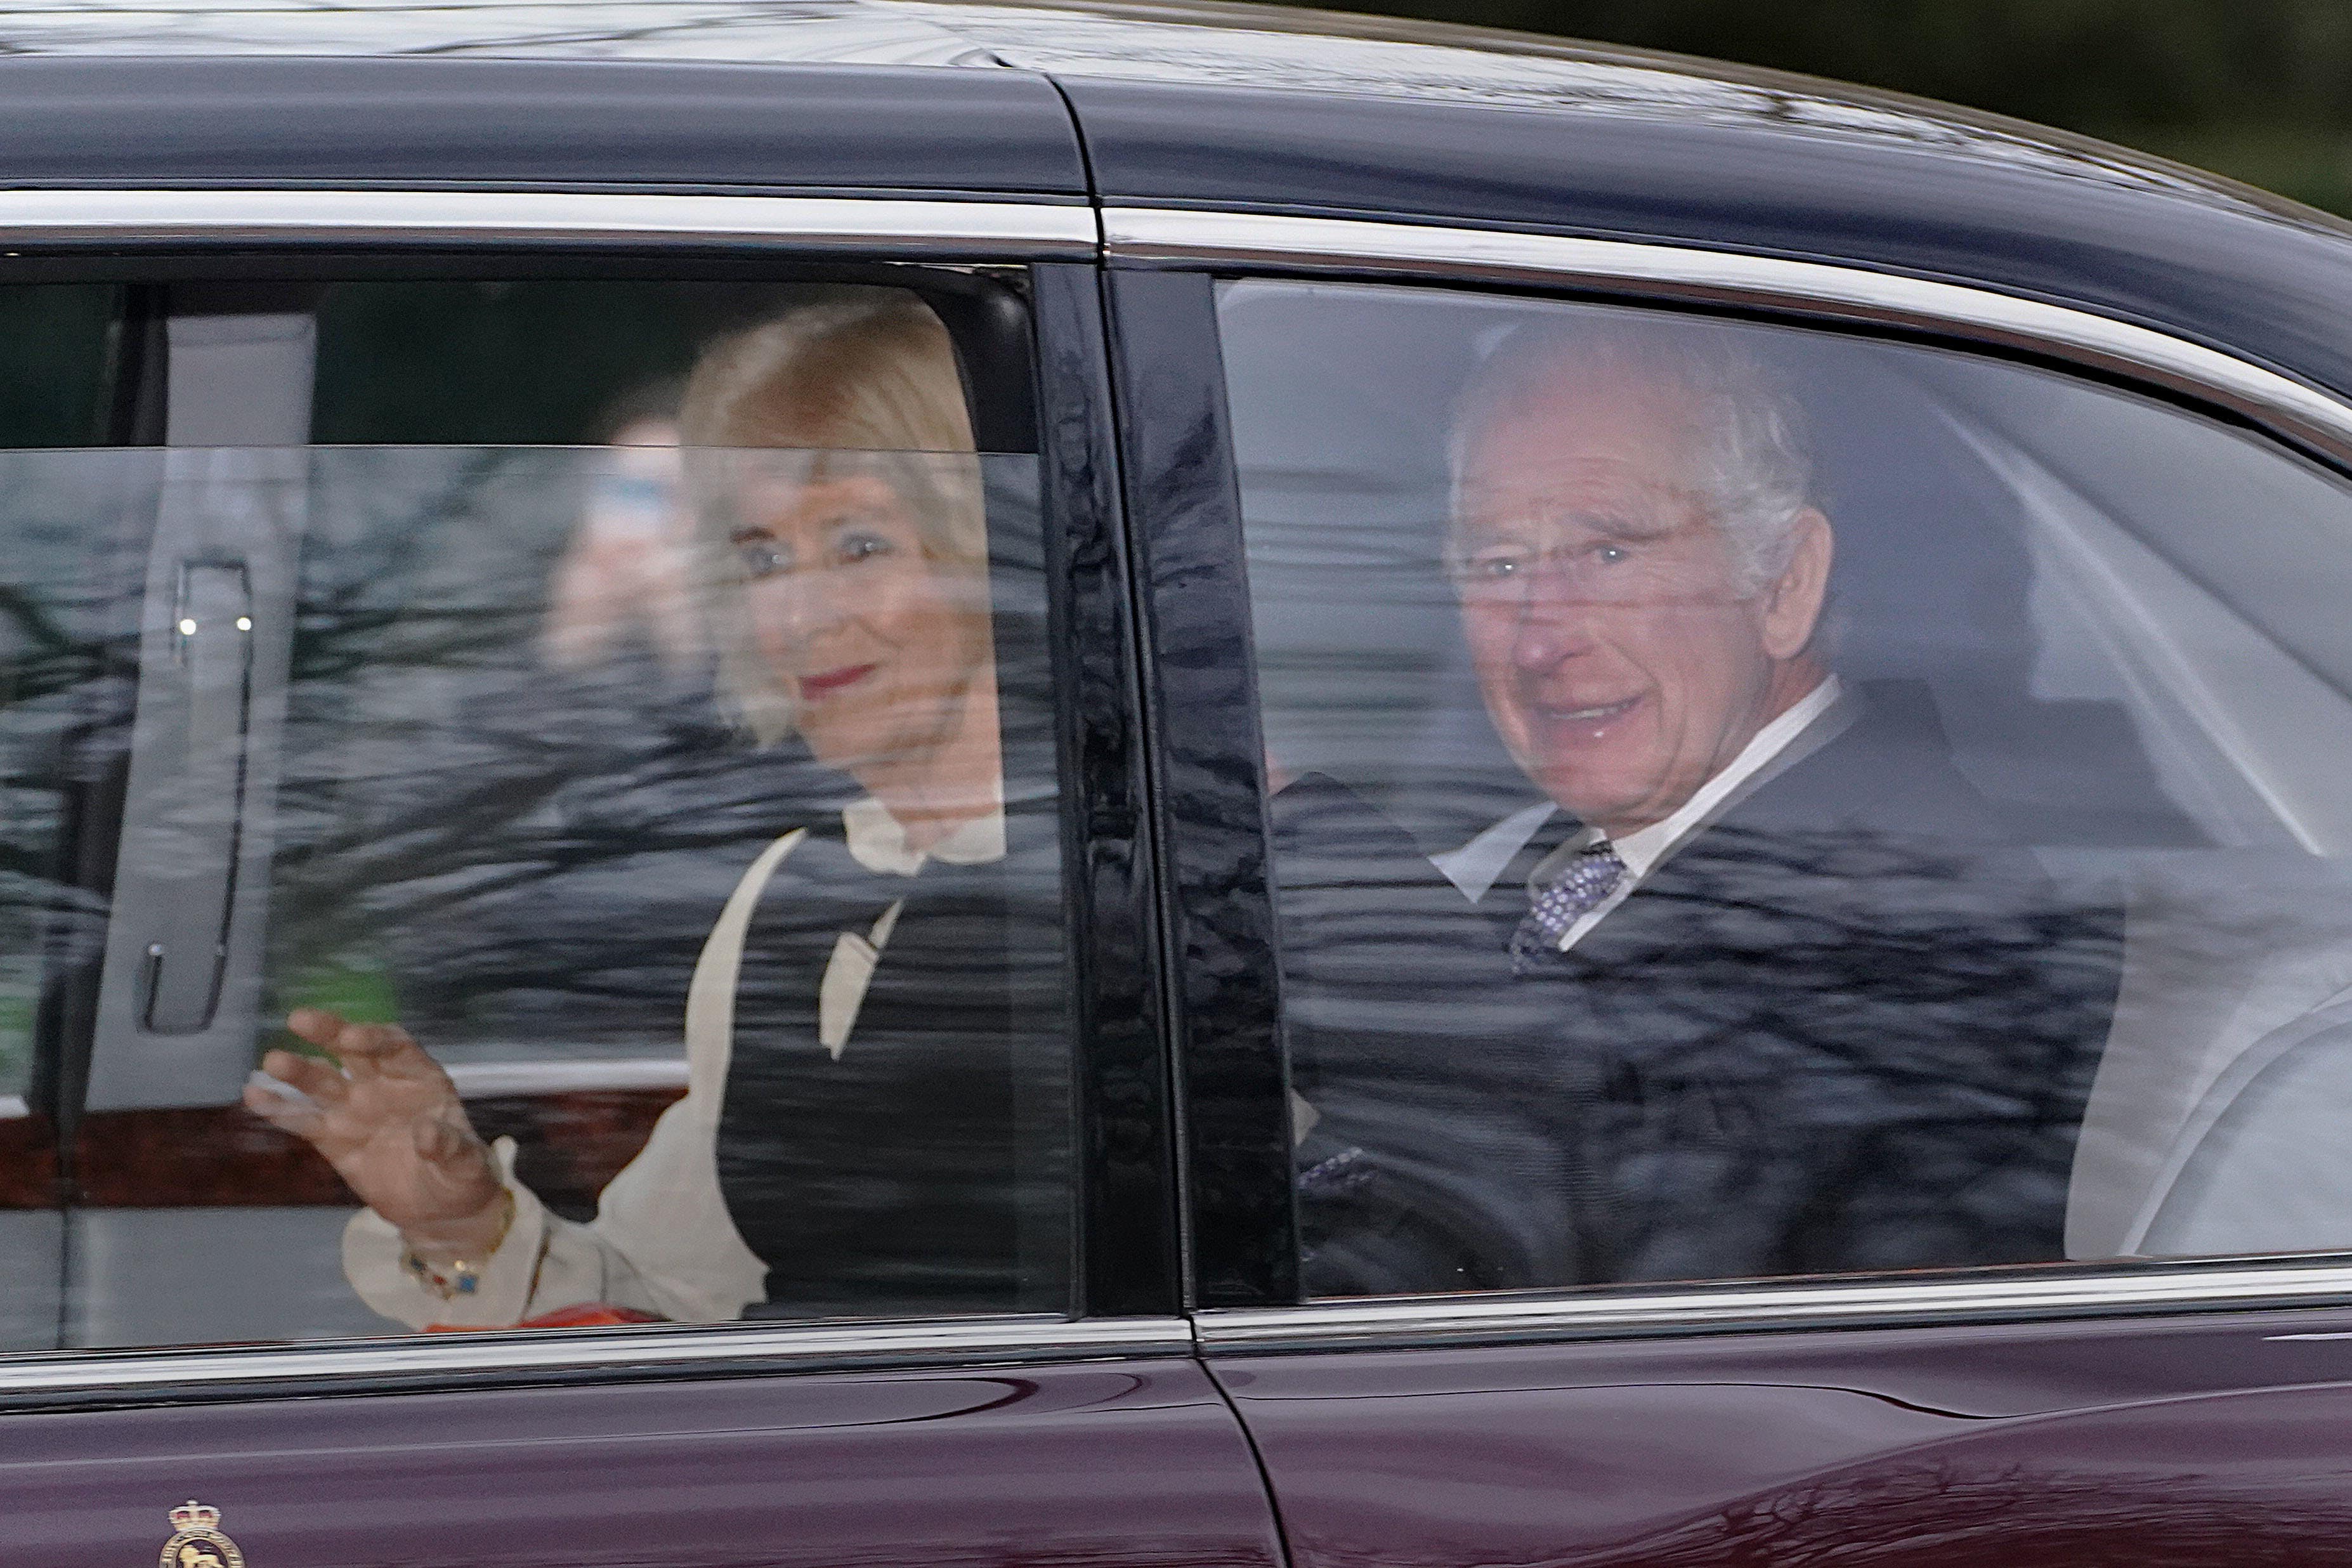 On Tuesday afternoon, the King was seen in public for the first time since his diagnosis, as he and the Queen were driven away from their London residence